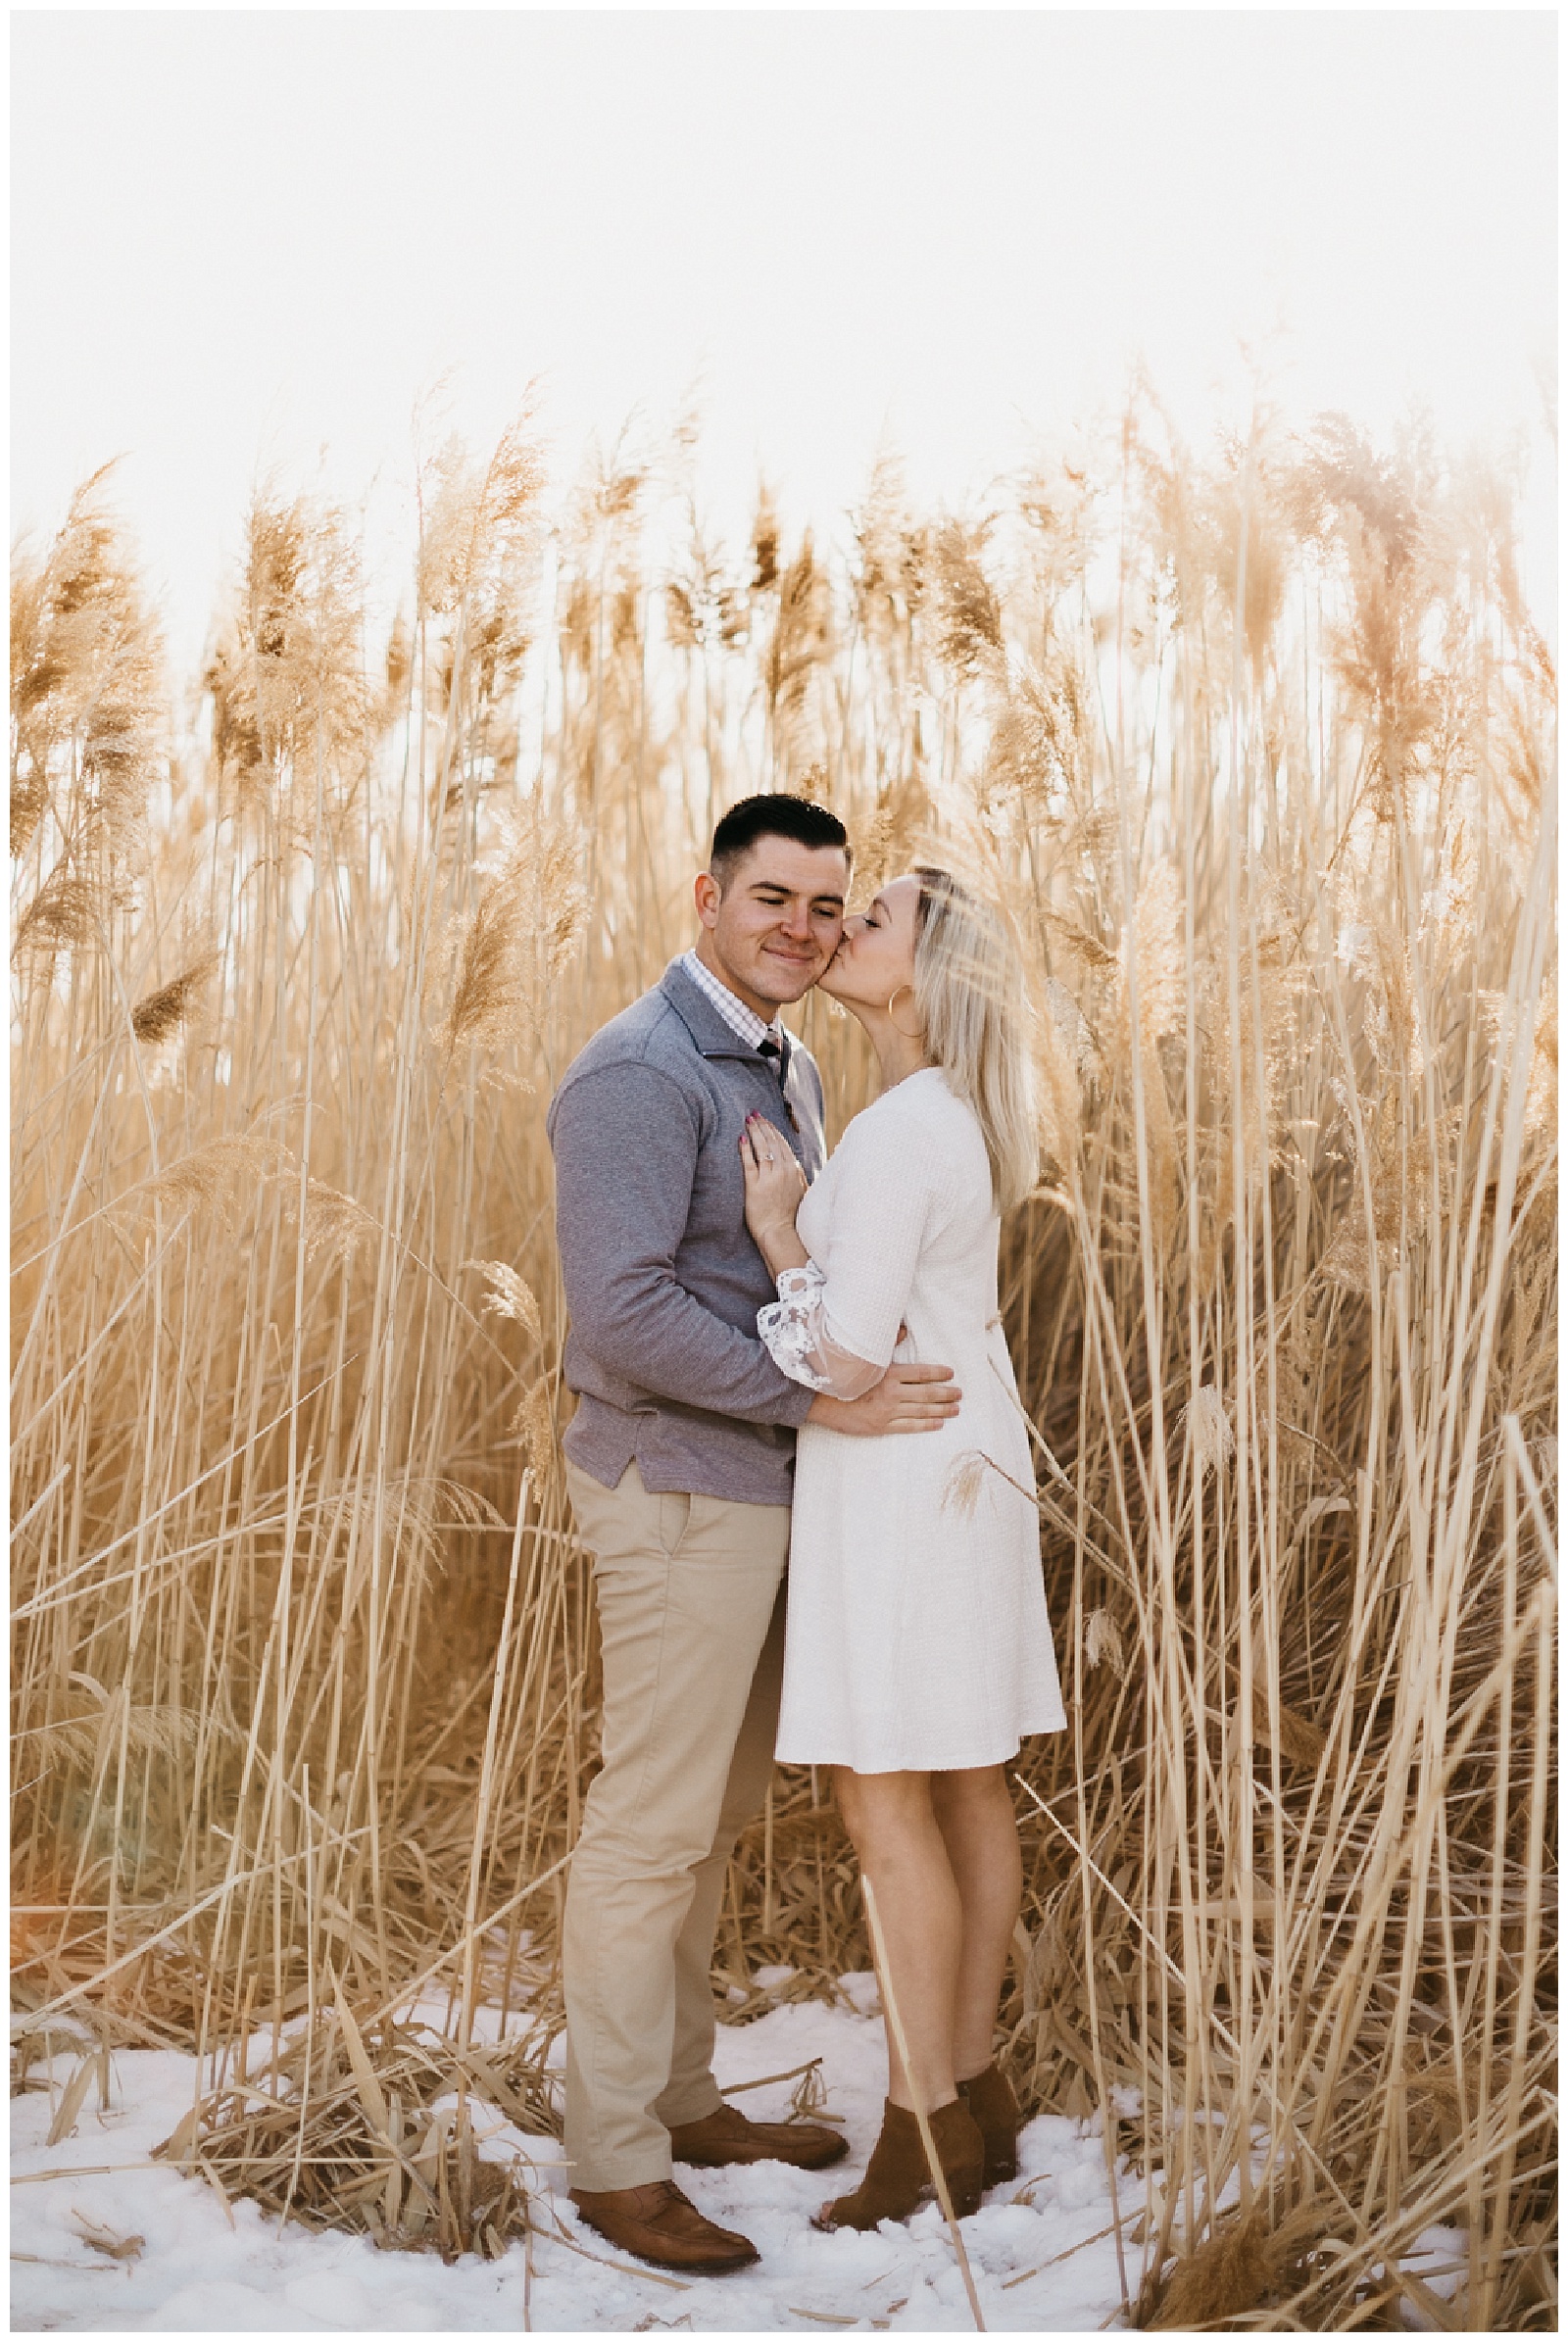 Hannah and John, Winter Engagements at Tunnel Springs Park - Nicole Aston  Photo